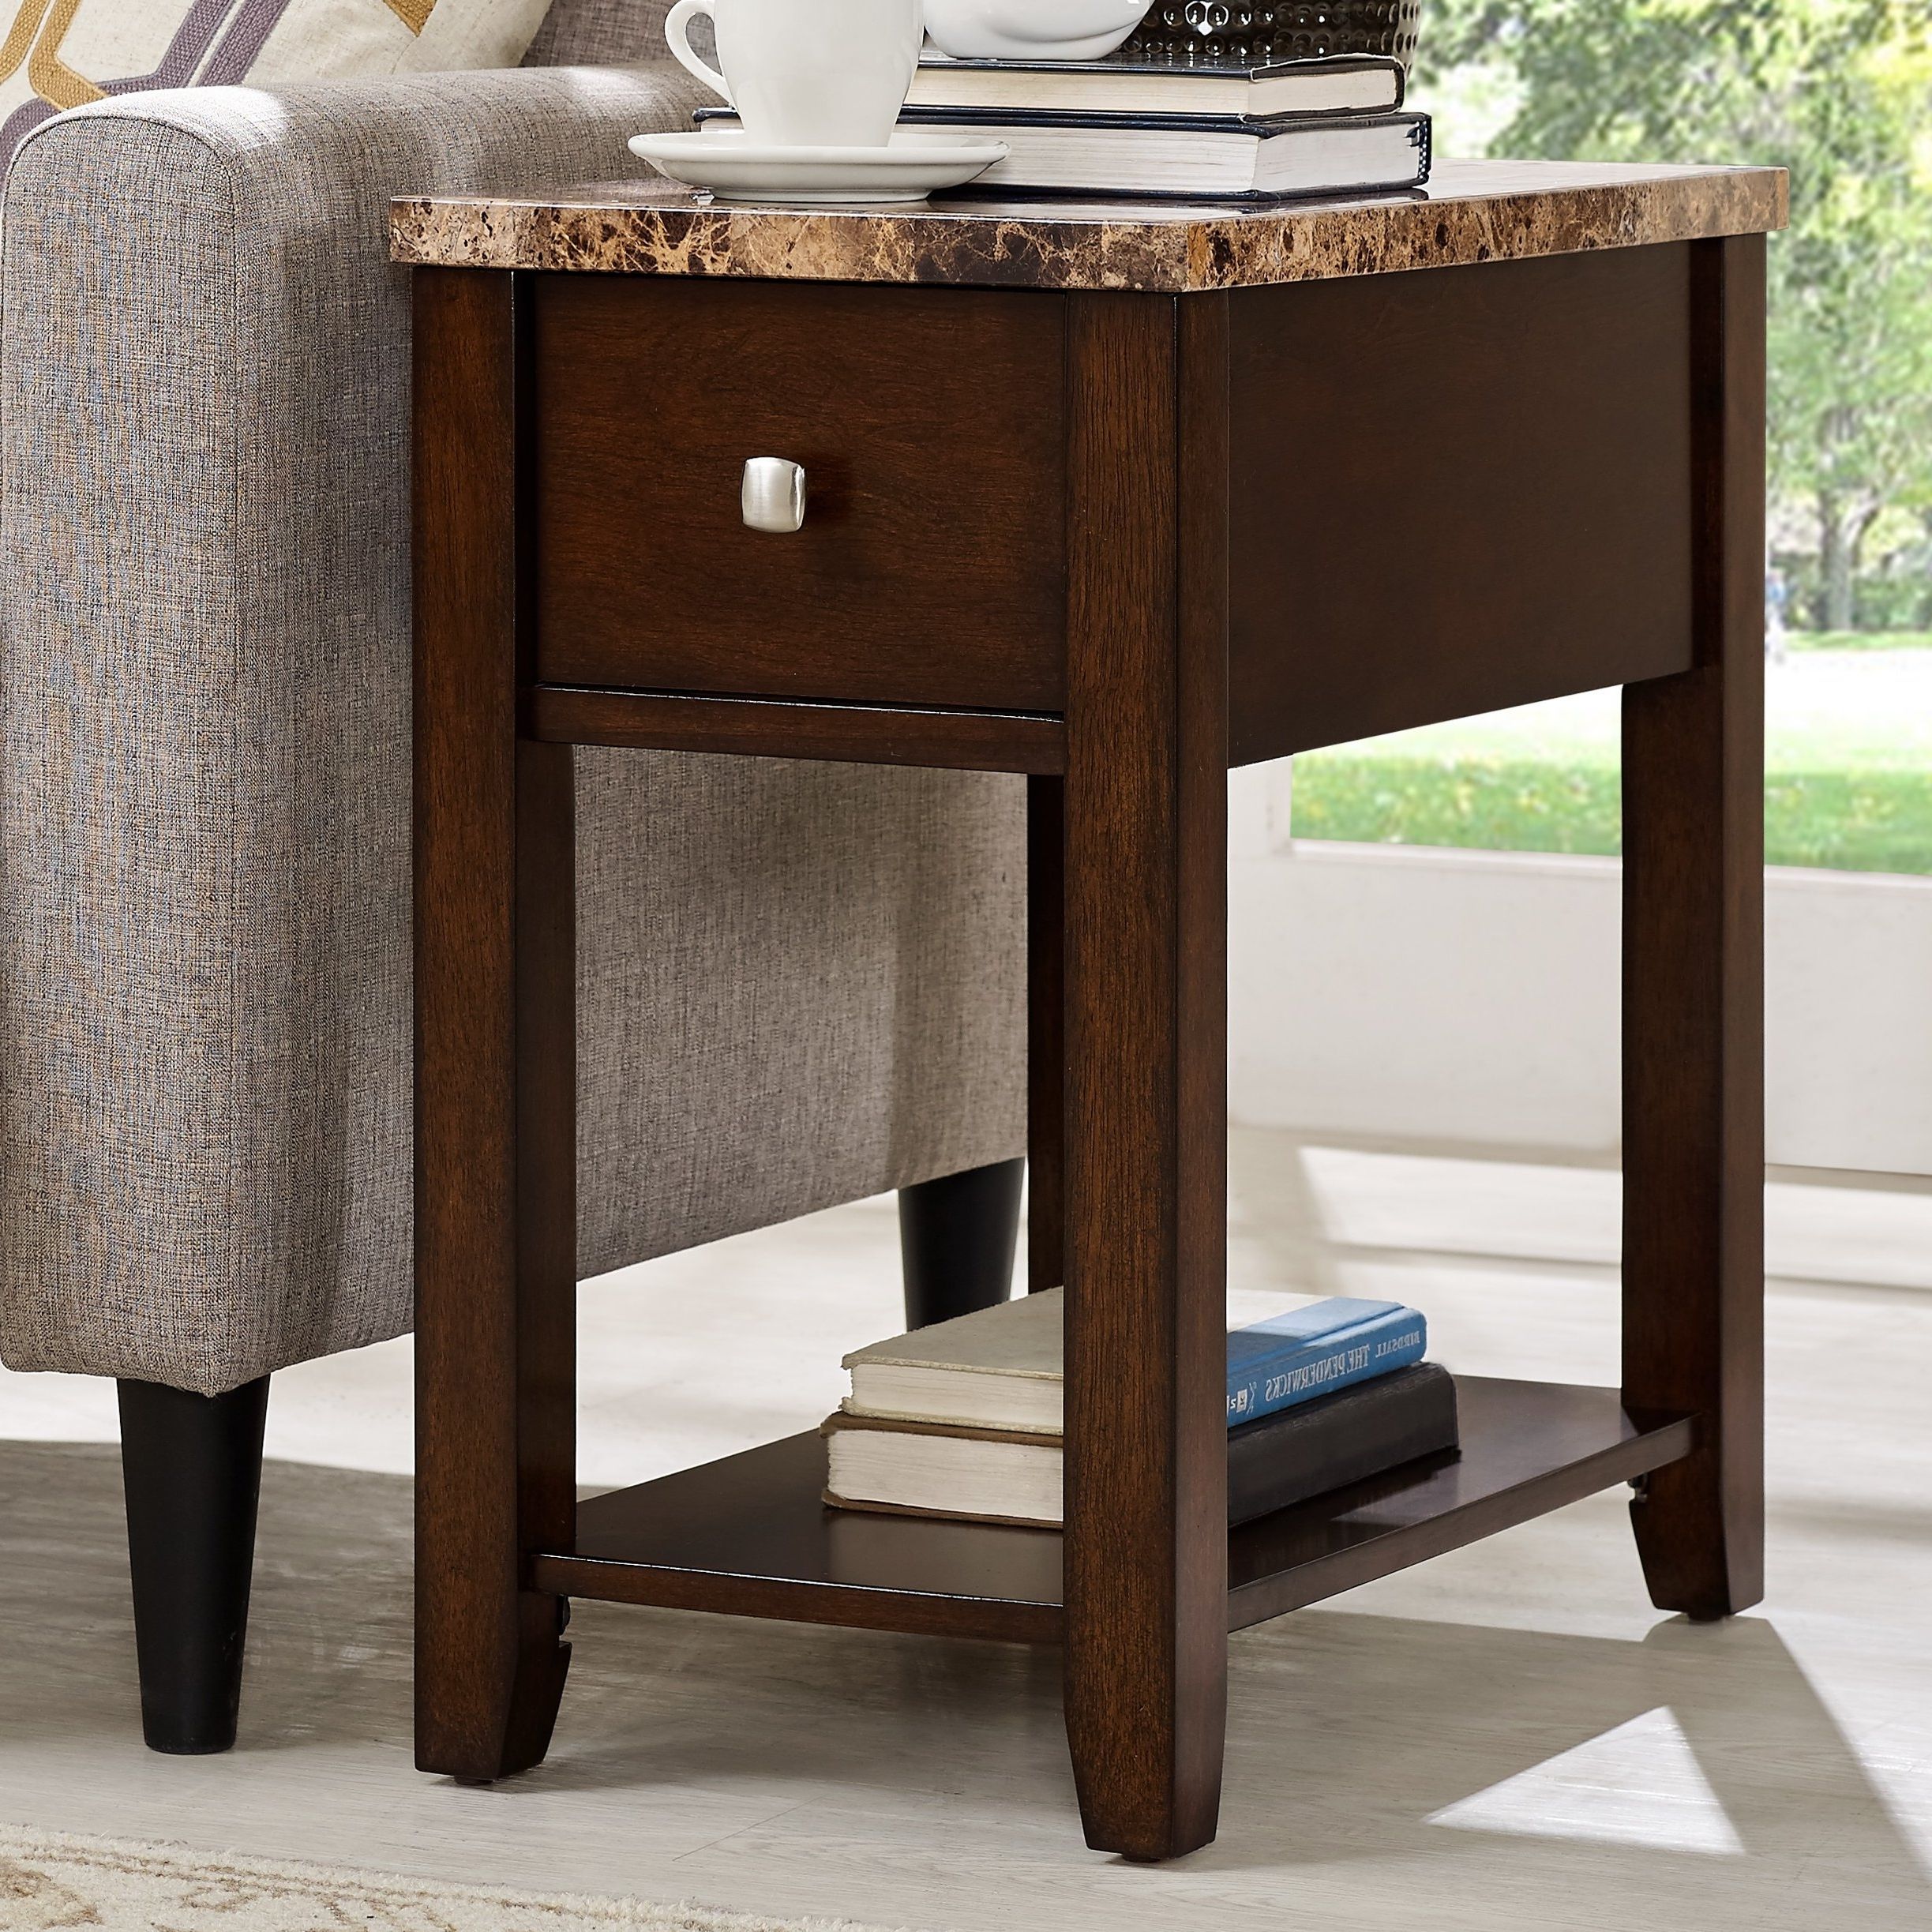 Wayfair Intended For 2018 Lassen Square Lift Top Cocktail Tables (View 18 of 20)